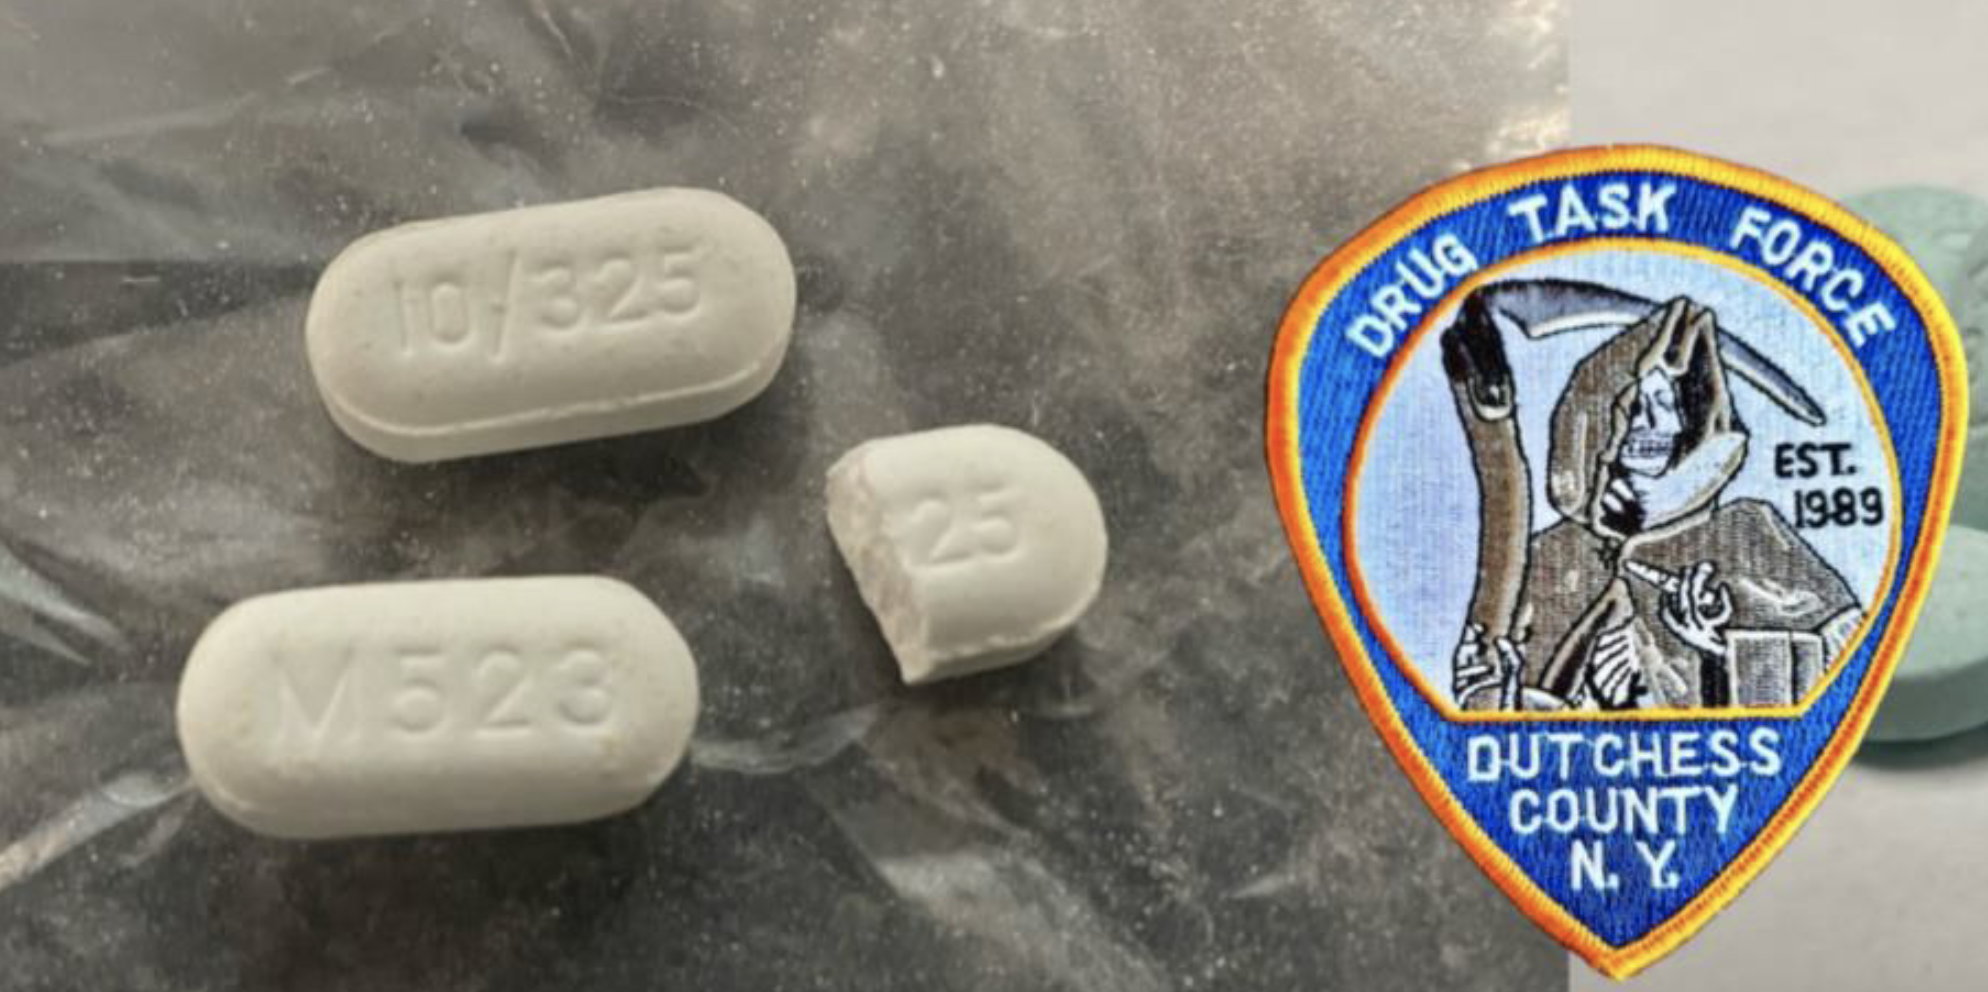 White, oblong shapes oxycodone pills next to a county seal.